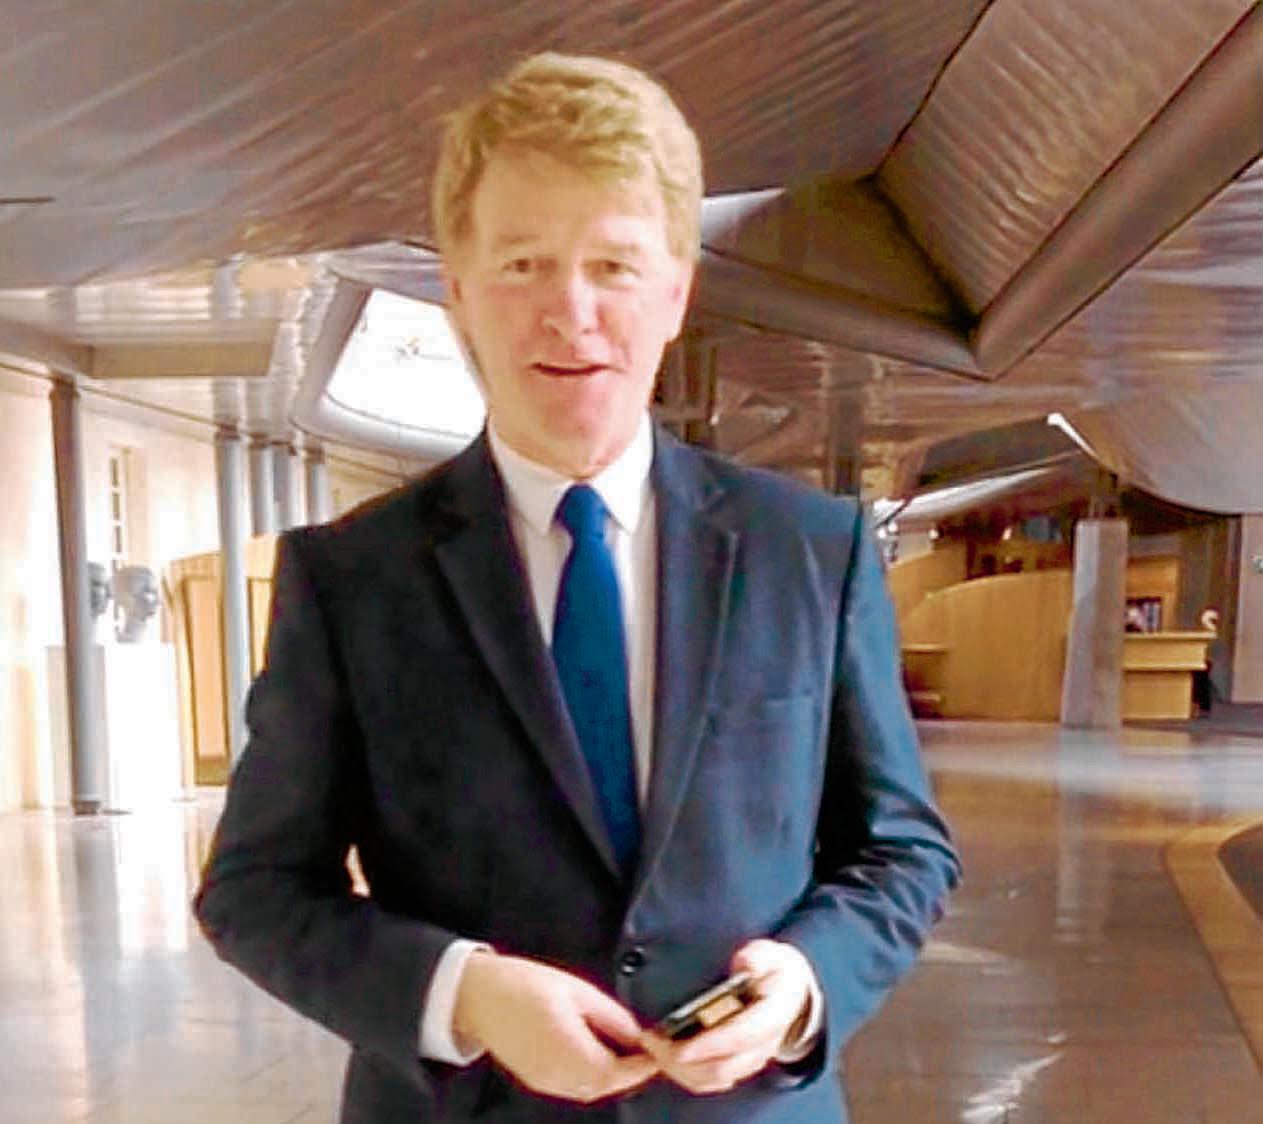 VIDEO: Today in Holyrood with Charles Fletcher